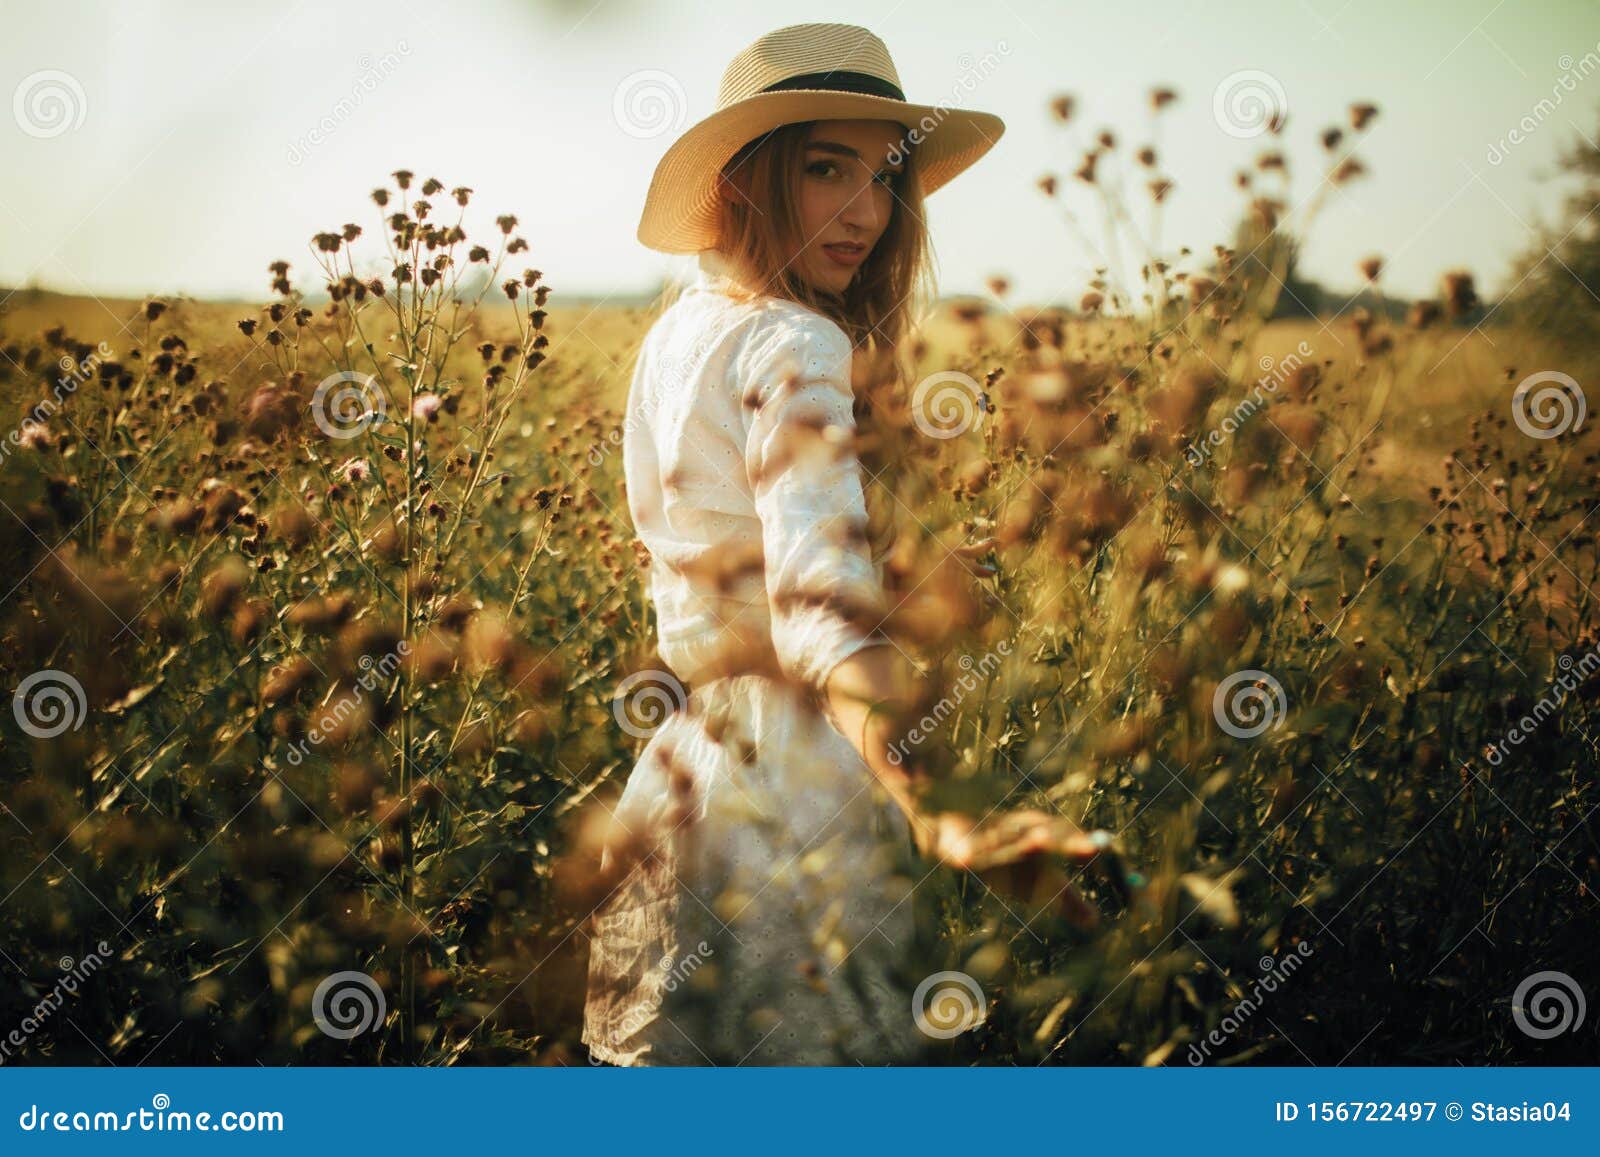 Pretty Young Woman is Walking among the Flowers on Meadow Stock Image ...